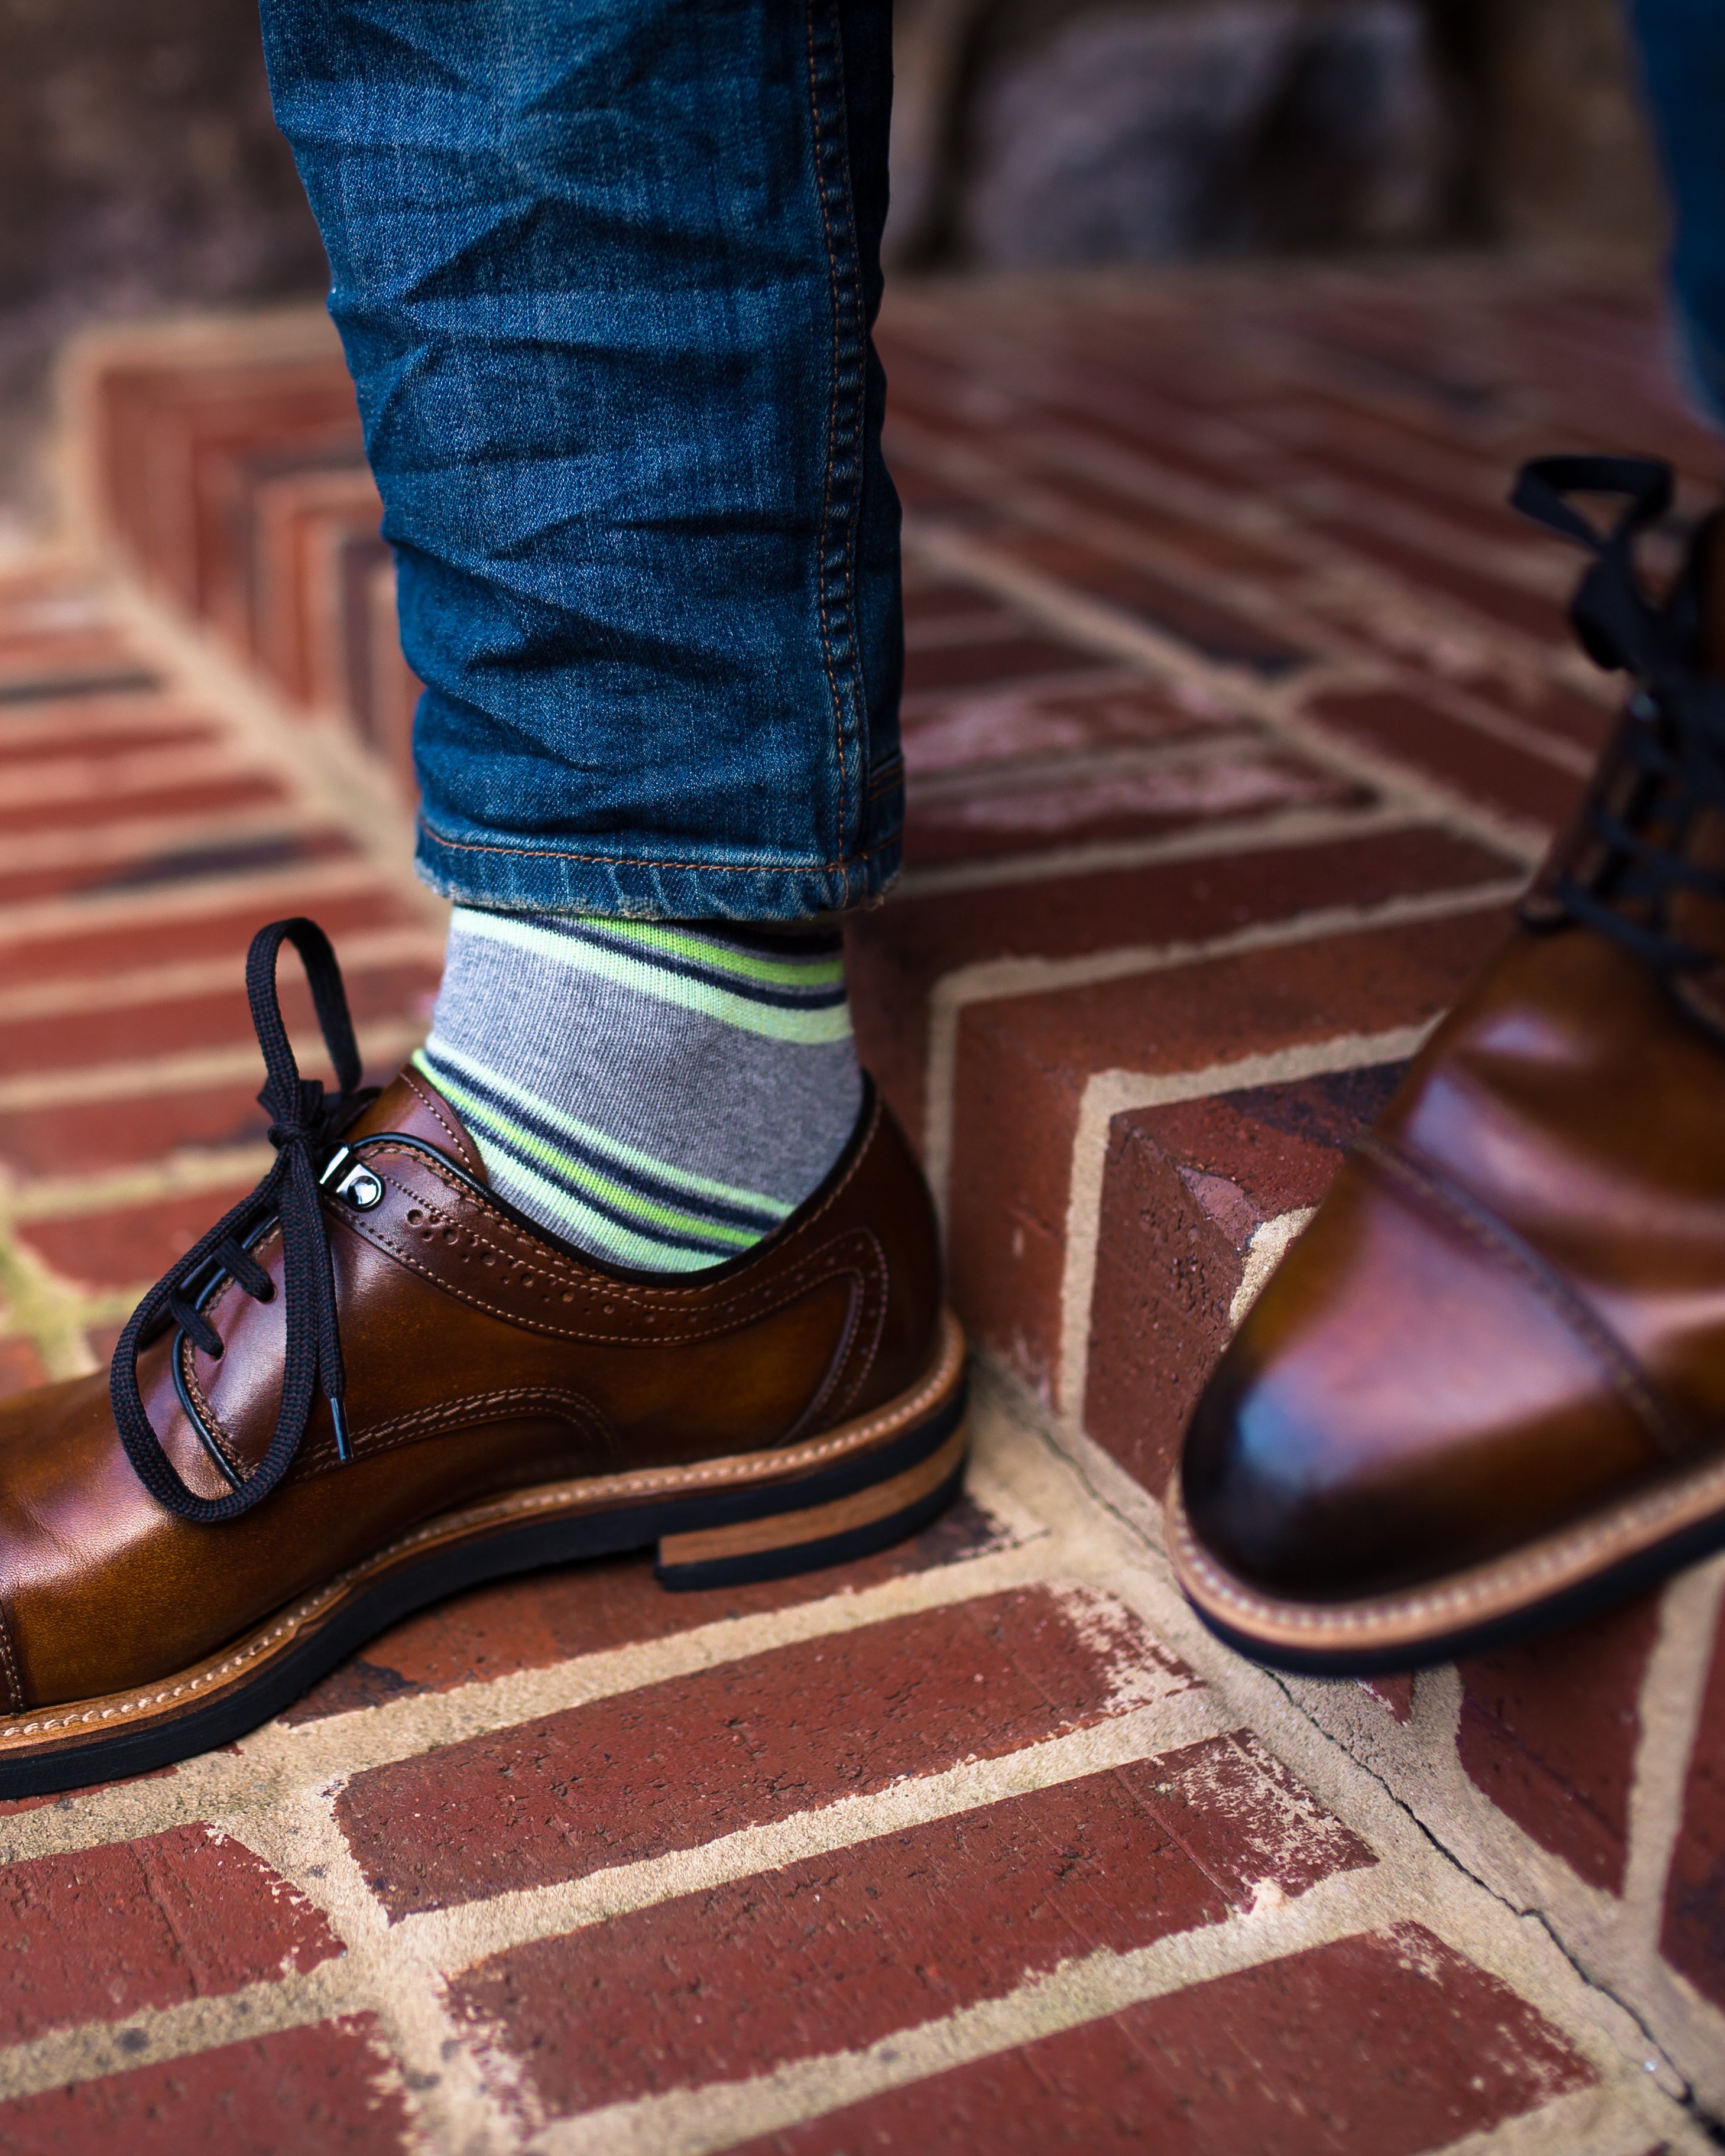 light grey over the calf dress socks with lime green stripes, brown dress shoes with black laces, blue jeans